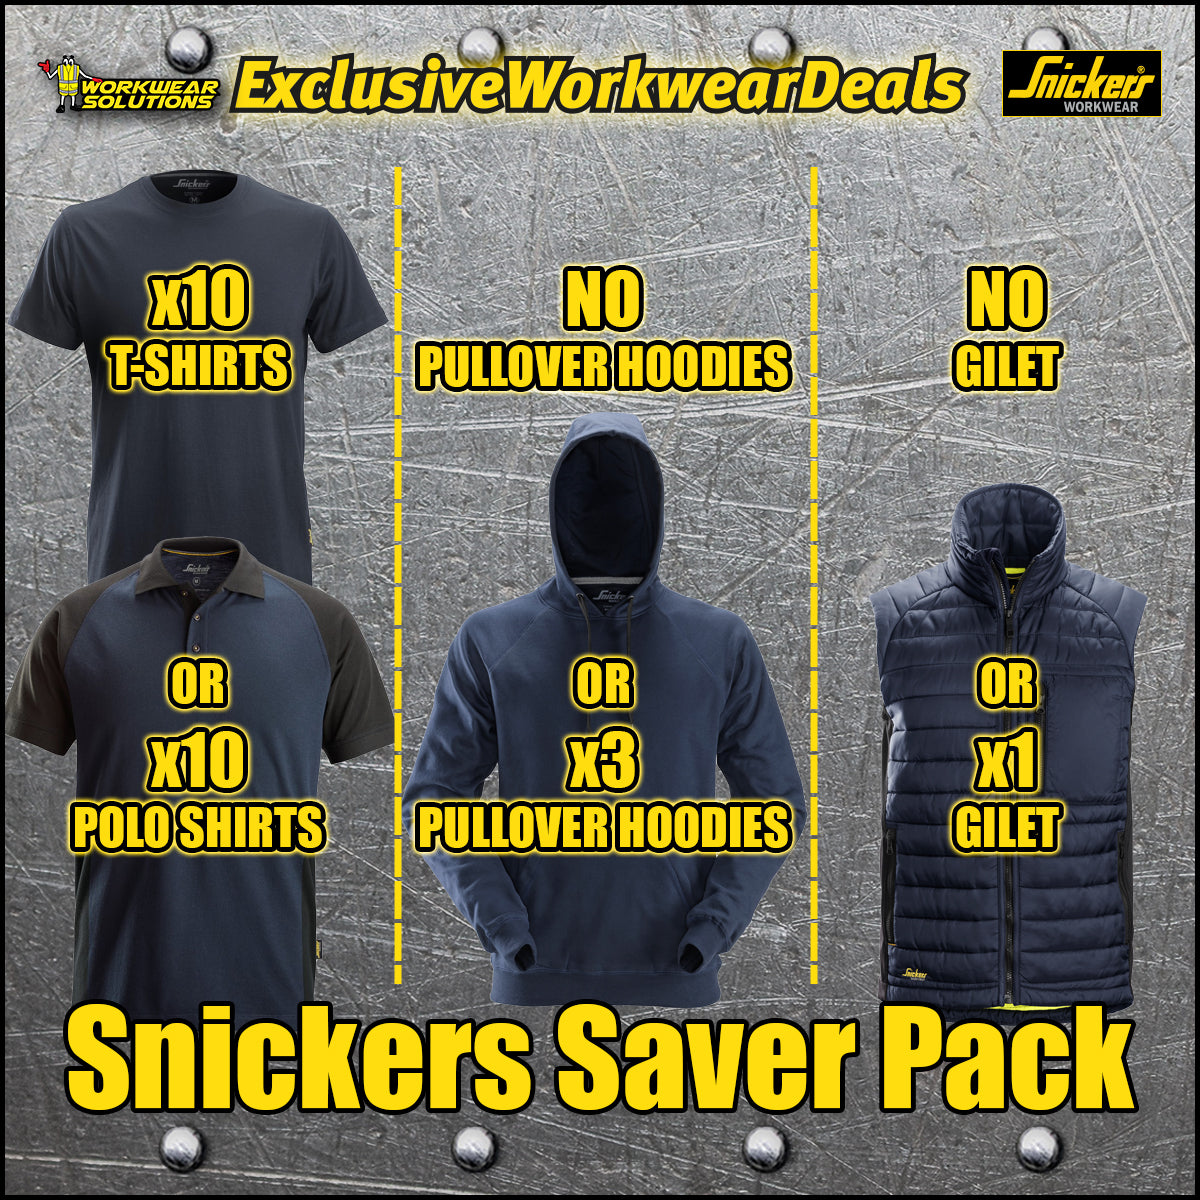 Snickers Saver Pack